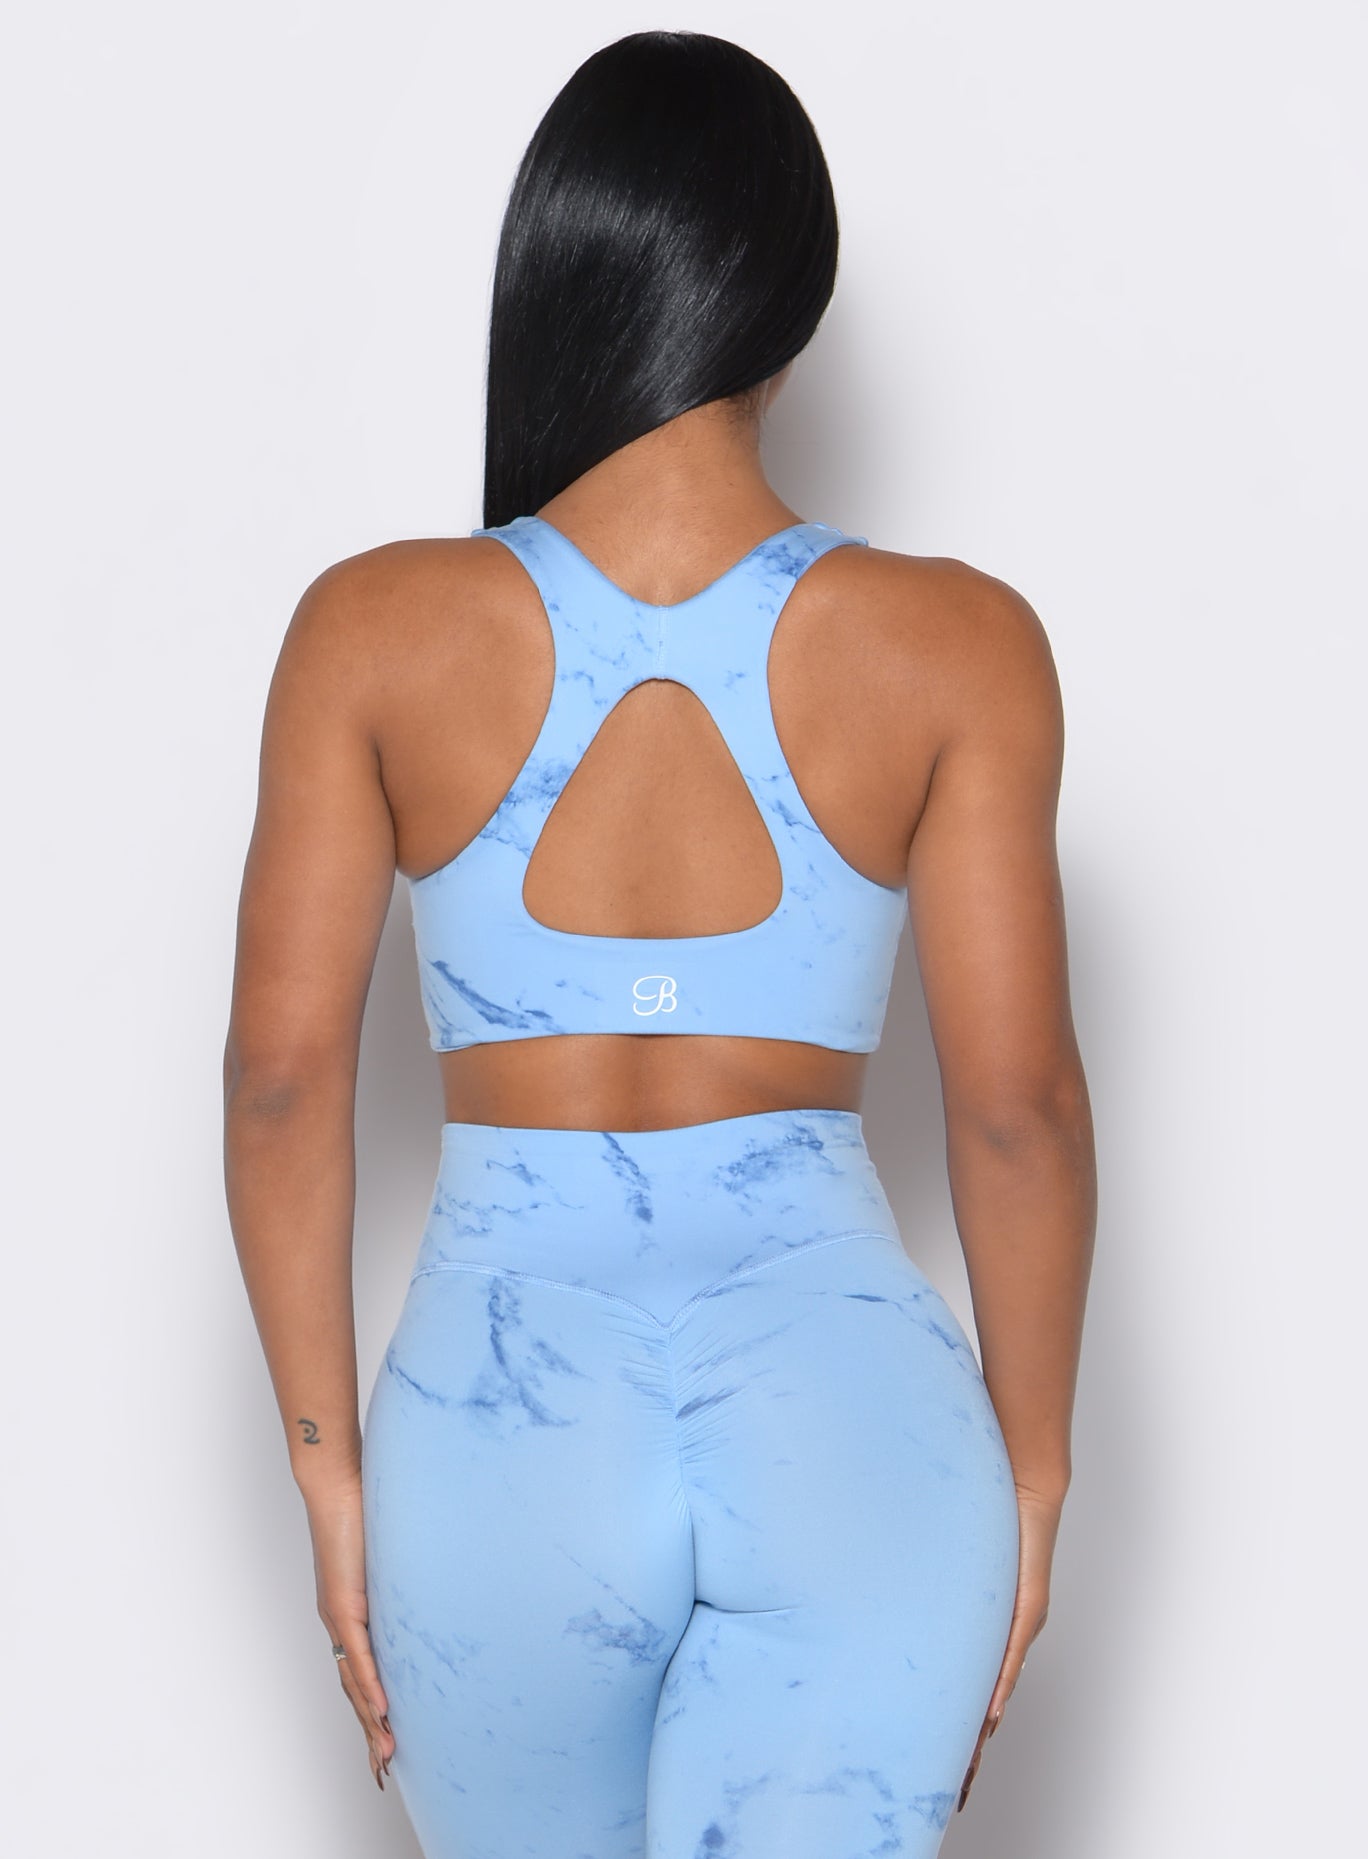 Back profile view of our model wearing the Square Neck Bra in Blue Jay color along with a matching leggings